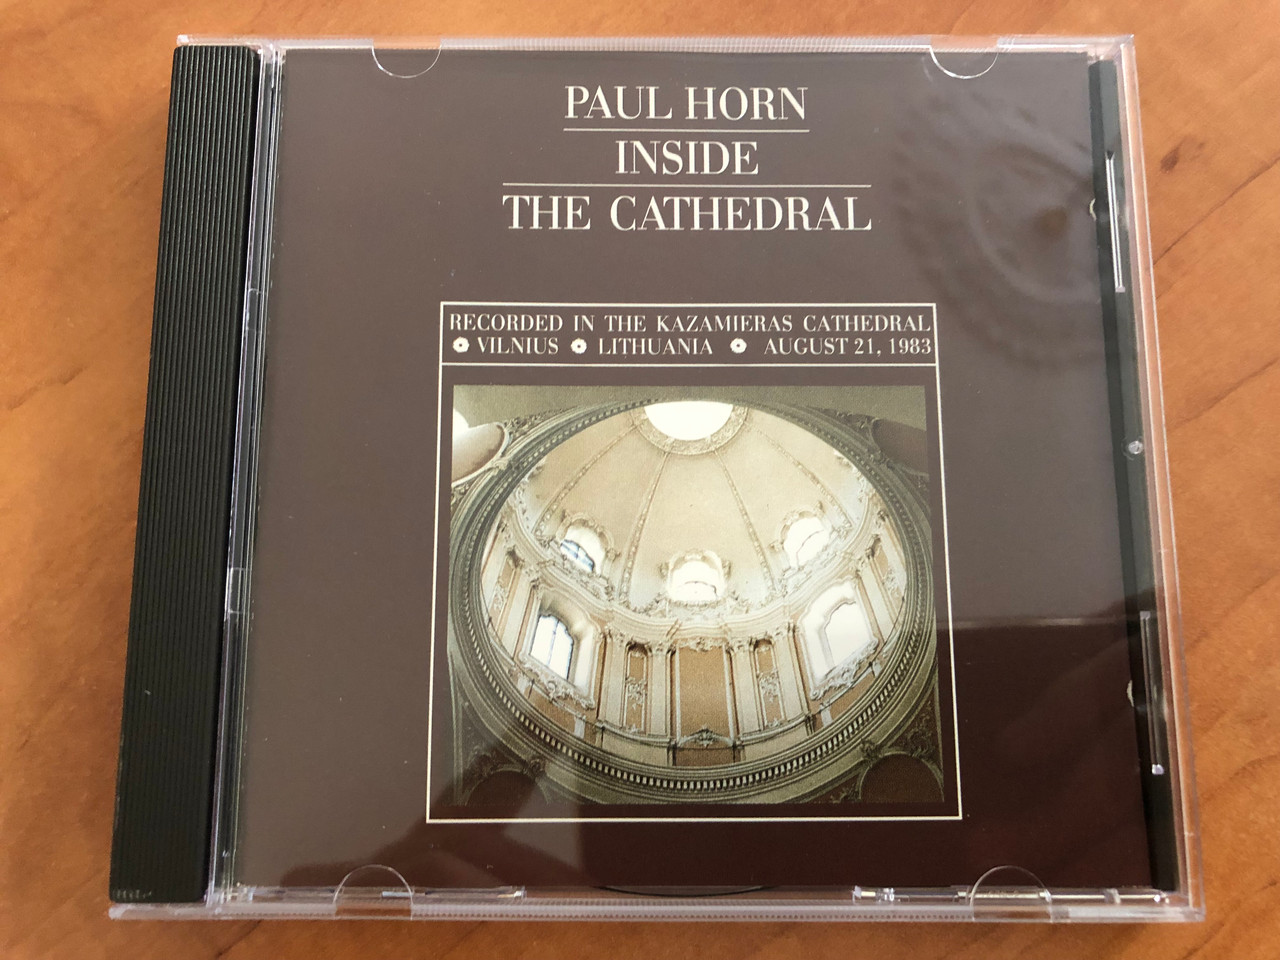 https://cdn10.bigcommerce.com/s-62bdpkt7pb/products/30798/images/181826/Paul_Horn_Inside_The_Cathedral_Recorded_In_The_Kazamieras_Cathedral_Vilnius_Lithuania_August_21_1983_Kuckuck_Audio_CD_1986_11075-2_1__63892.1623931882.1280.1280.JPG?c=2